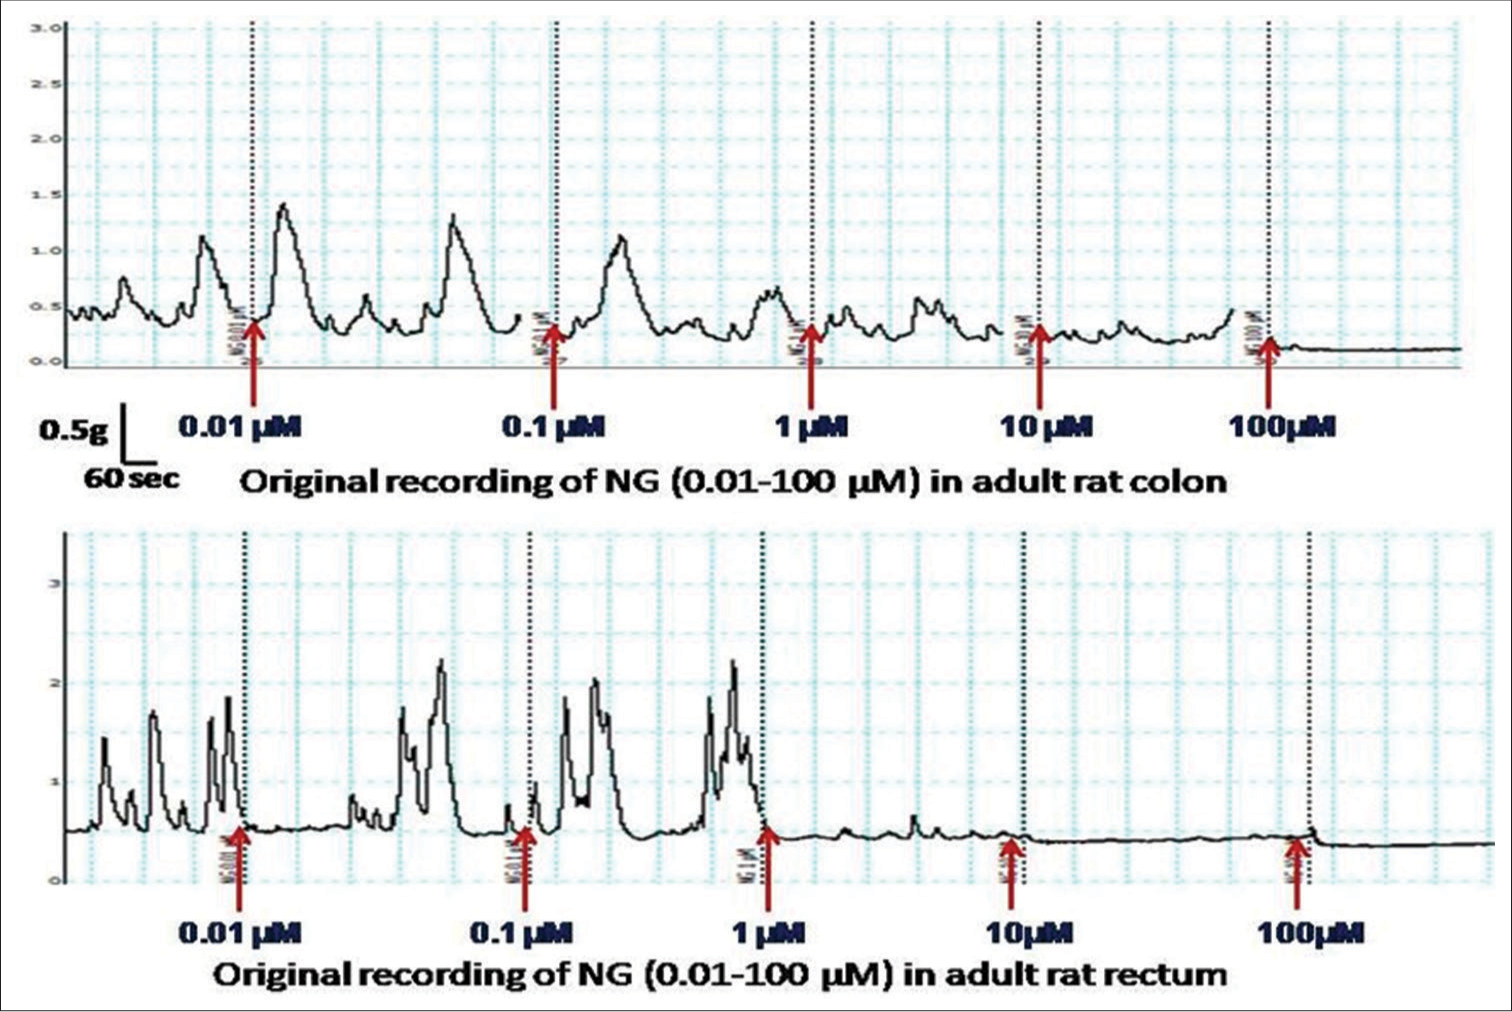 Image showing an original recording of contractile response at different concentrations of nitroglycerin (0.01–100 mM) in the colon and rectum of adult rats.